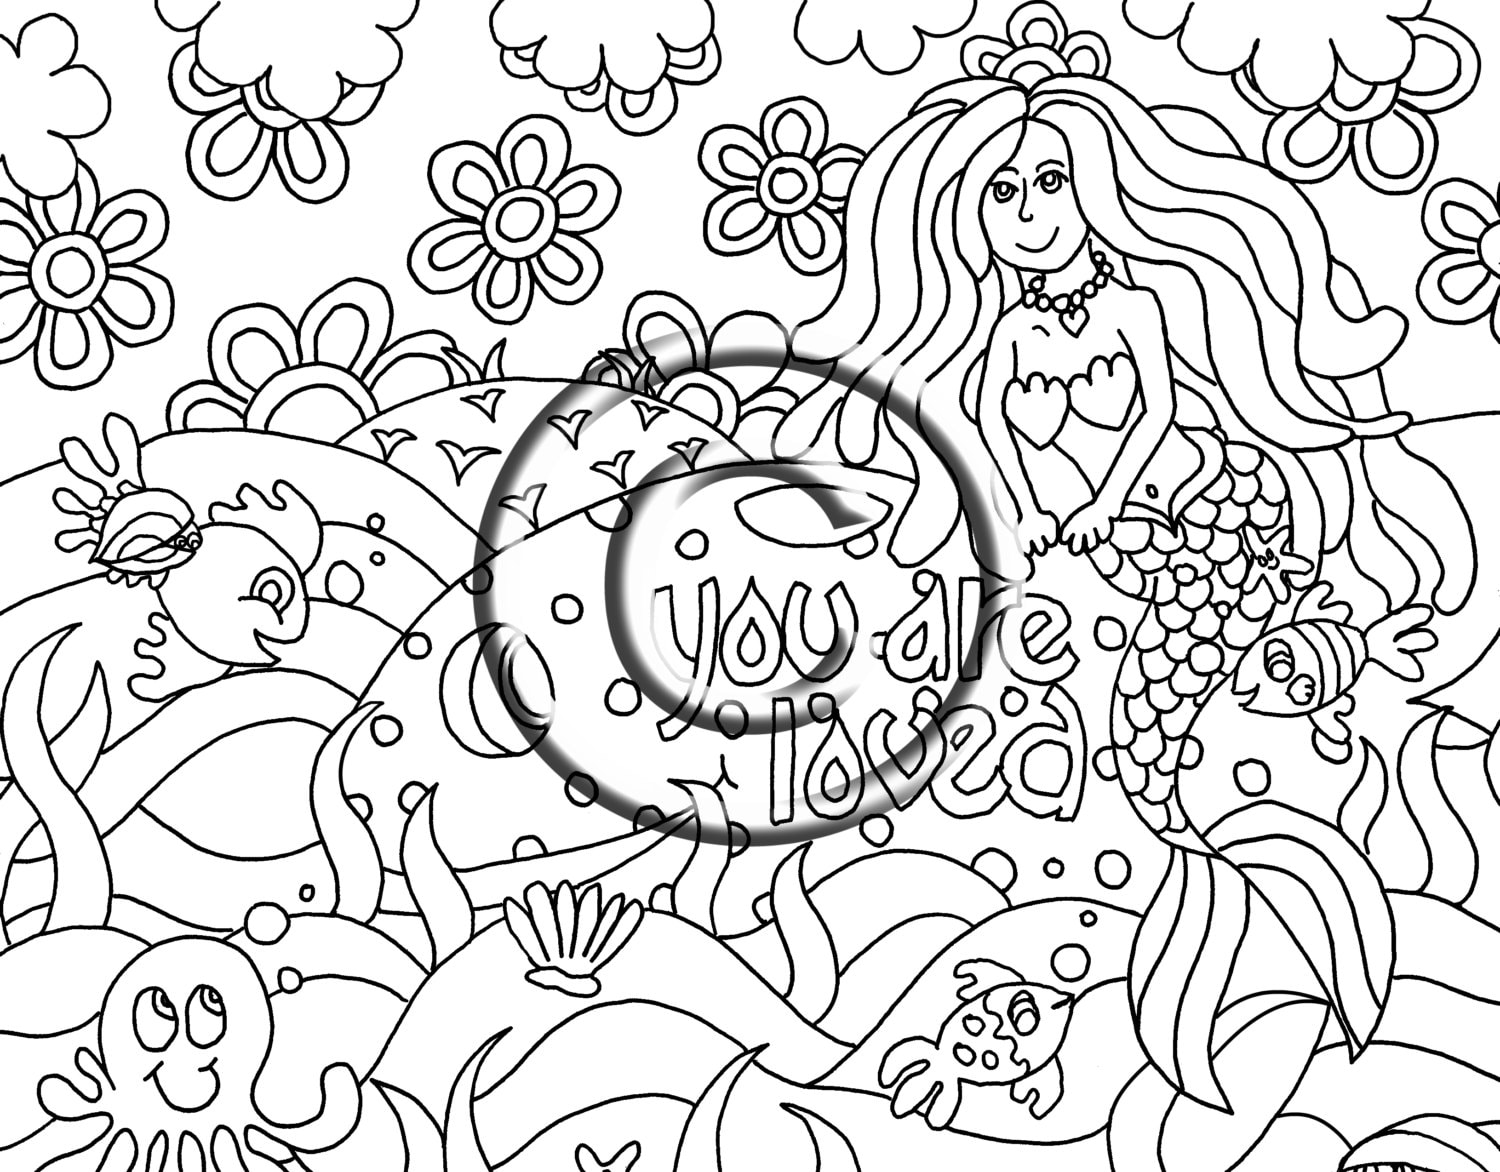 Instant PDF Digital Download Coloring Page Hand Drawn